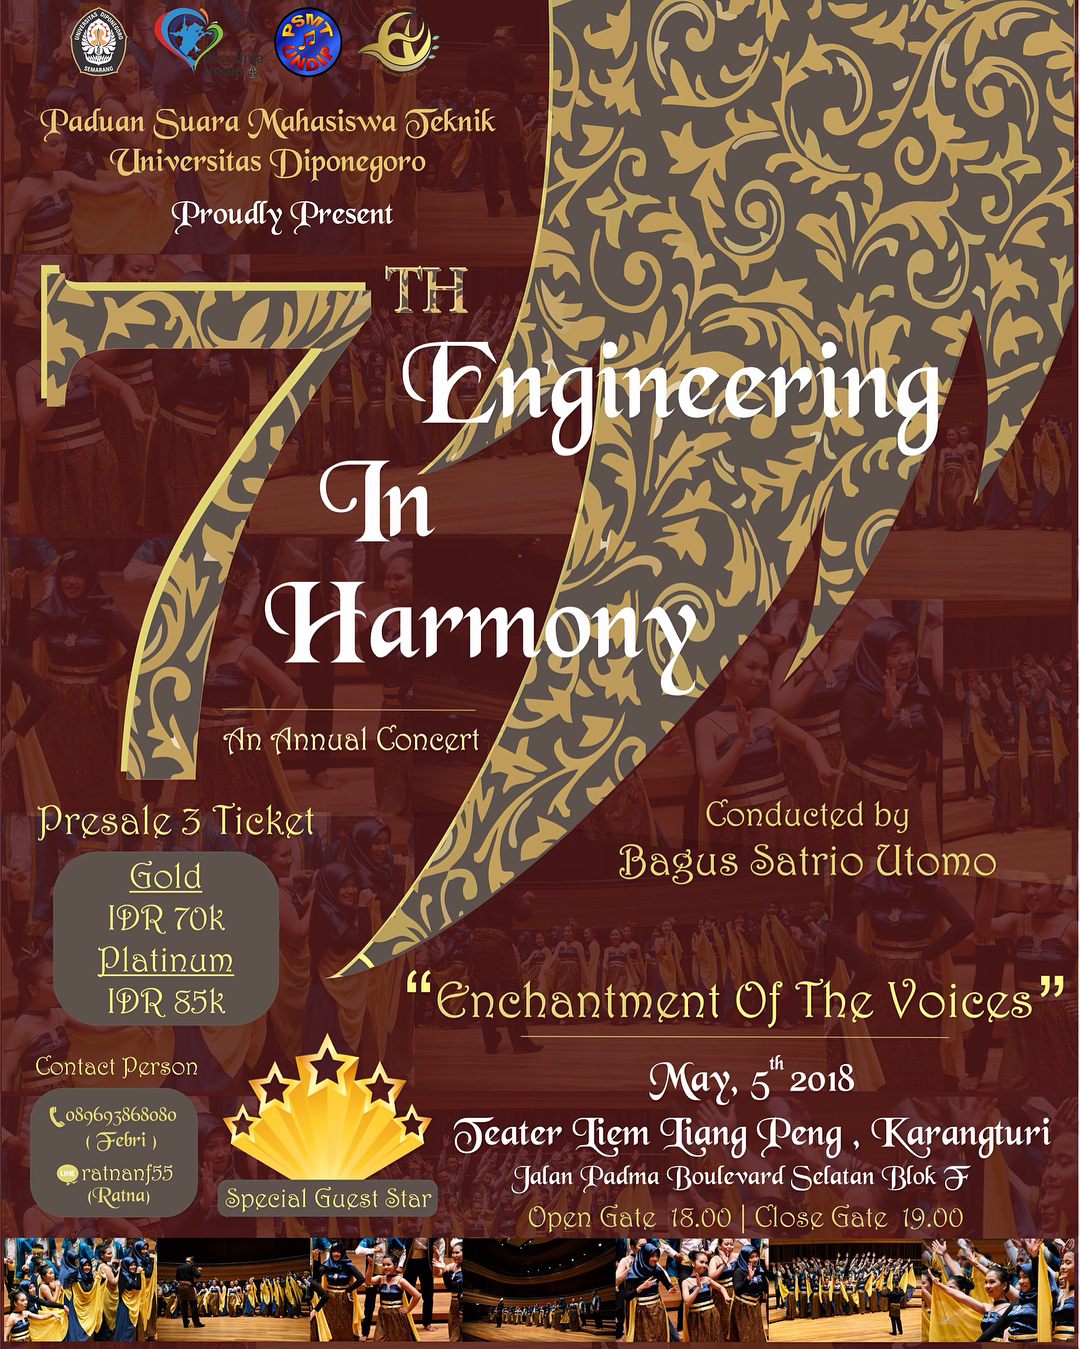 EVENT SEMARANG - 7TH ENGINEERING IN HARMONY ENCHANTMENT OF THE VOICES